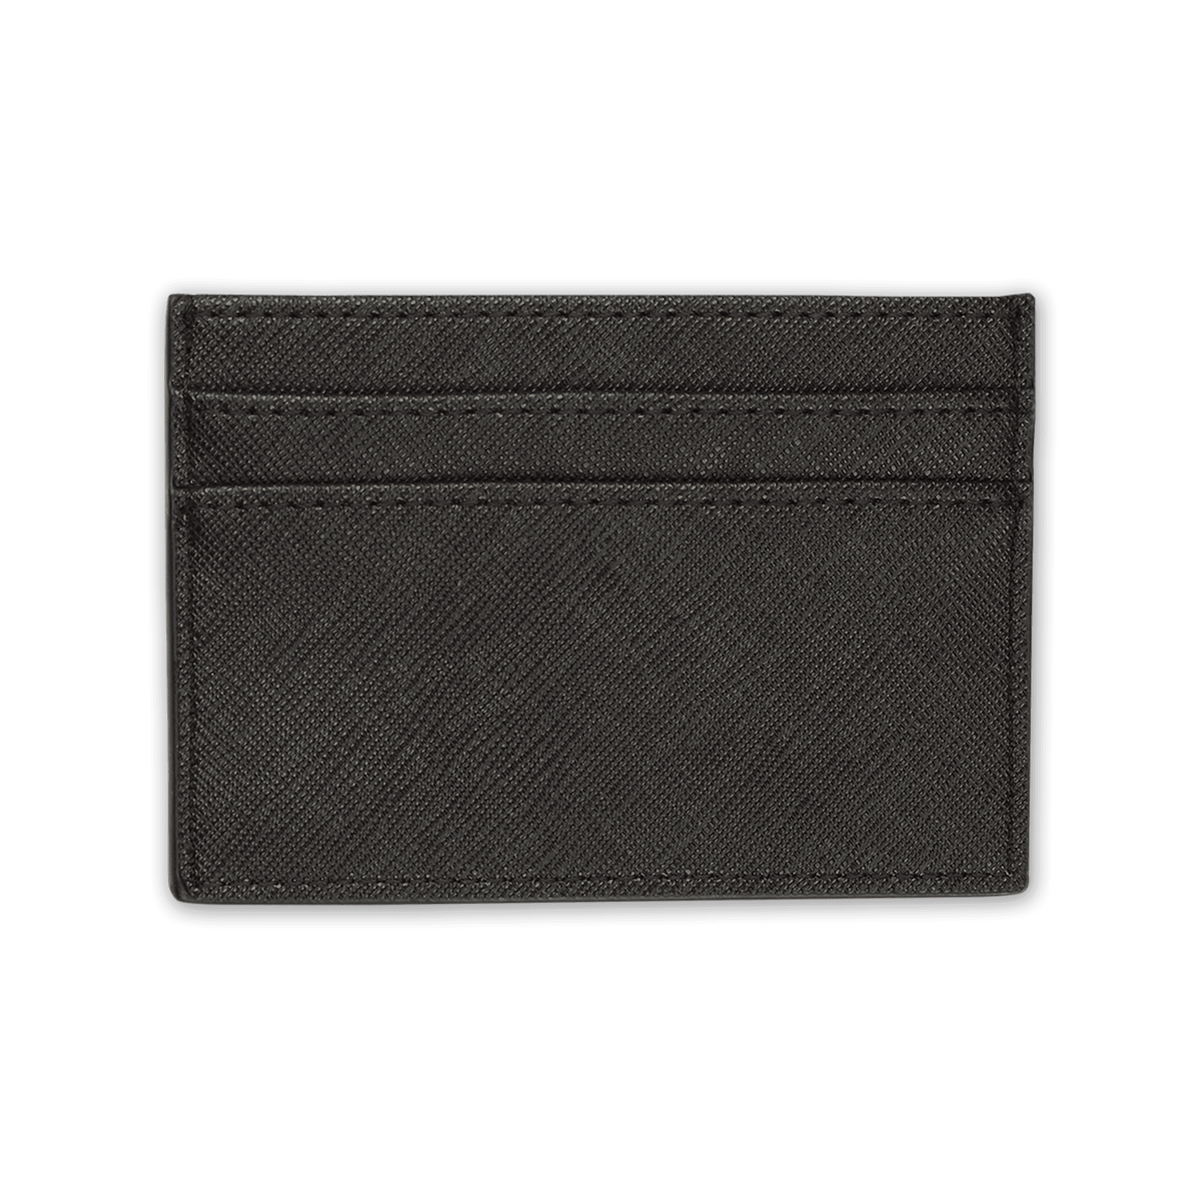 Personalise Your Black Saffiano Leather Cardholder